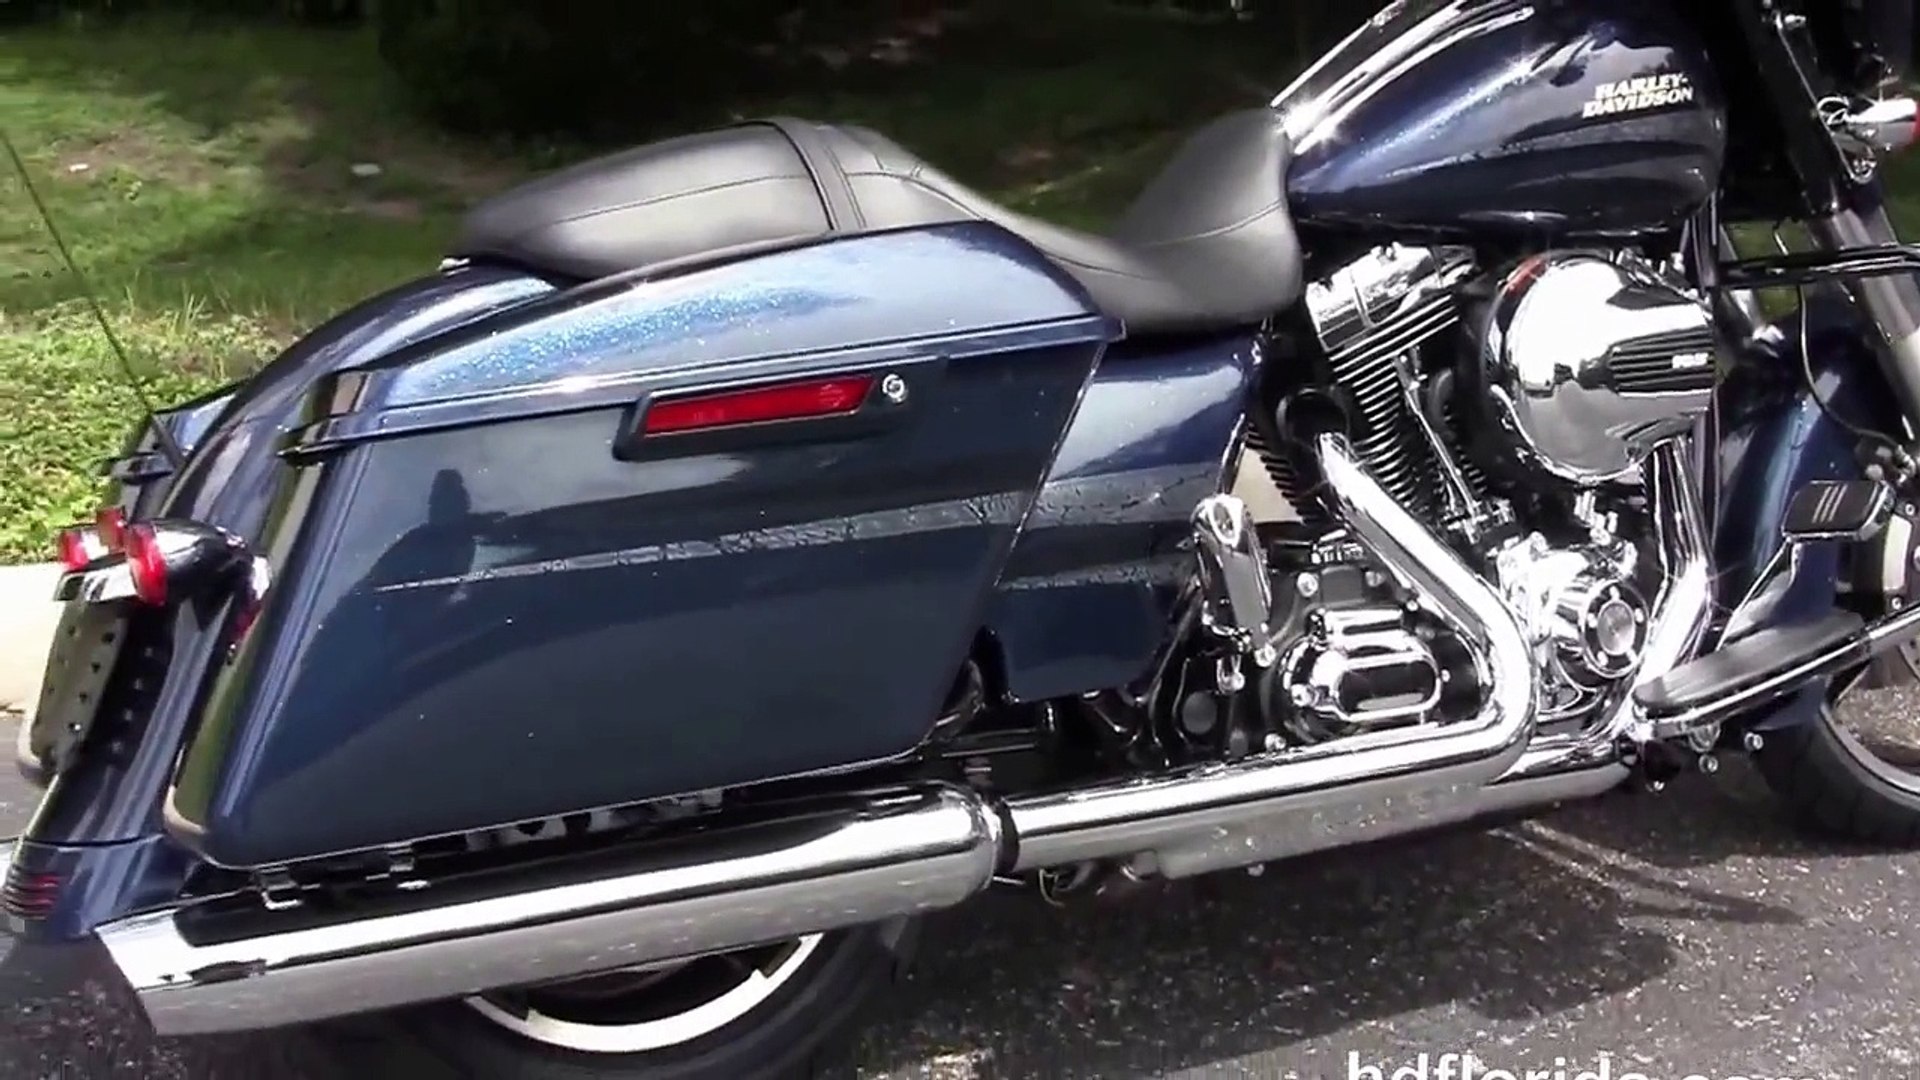 New 2016 Harley Davidson Street Glide Special Motorcycles for sale